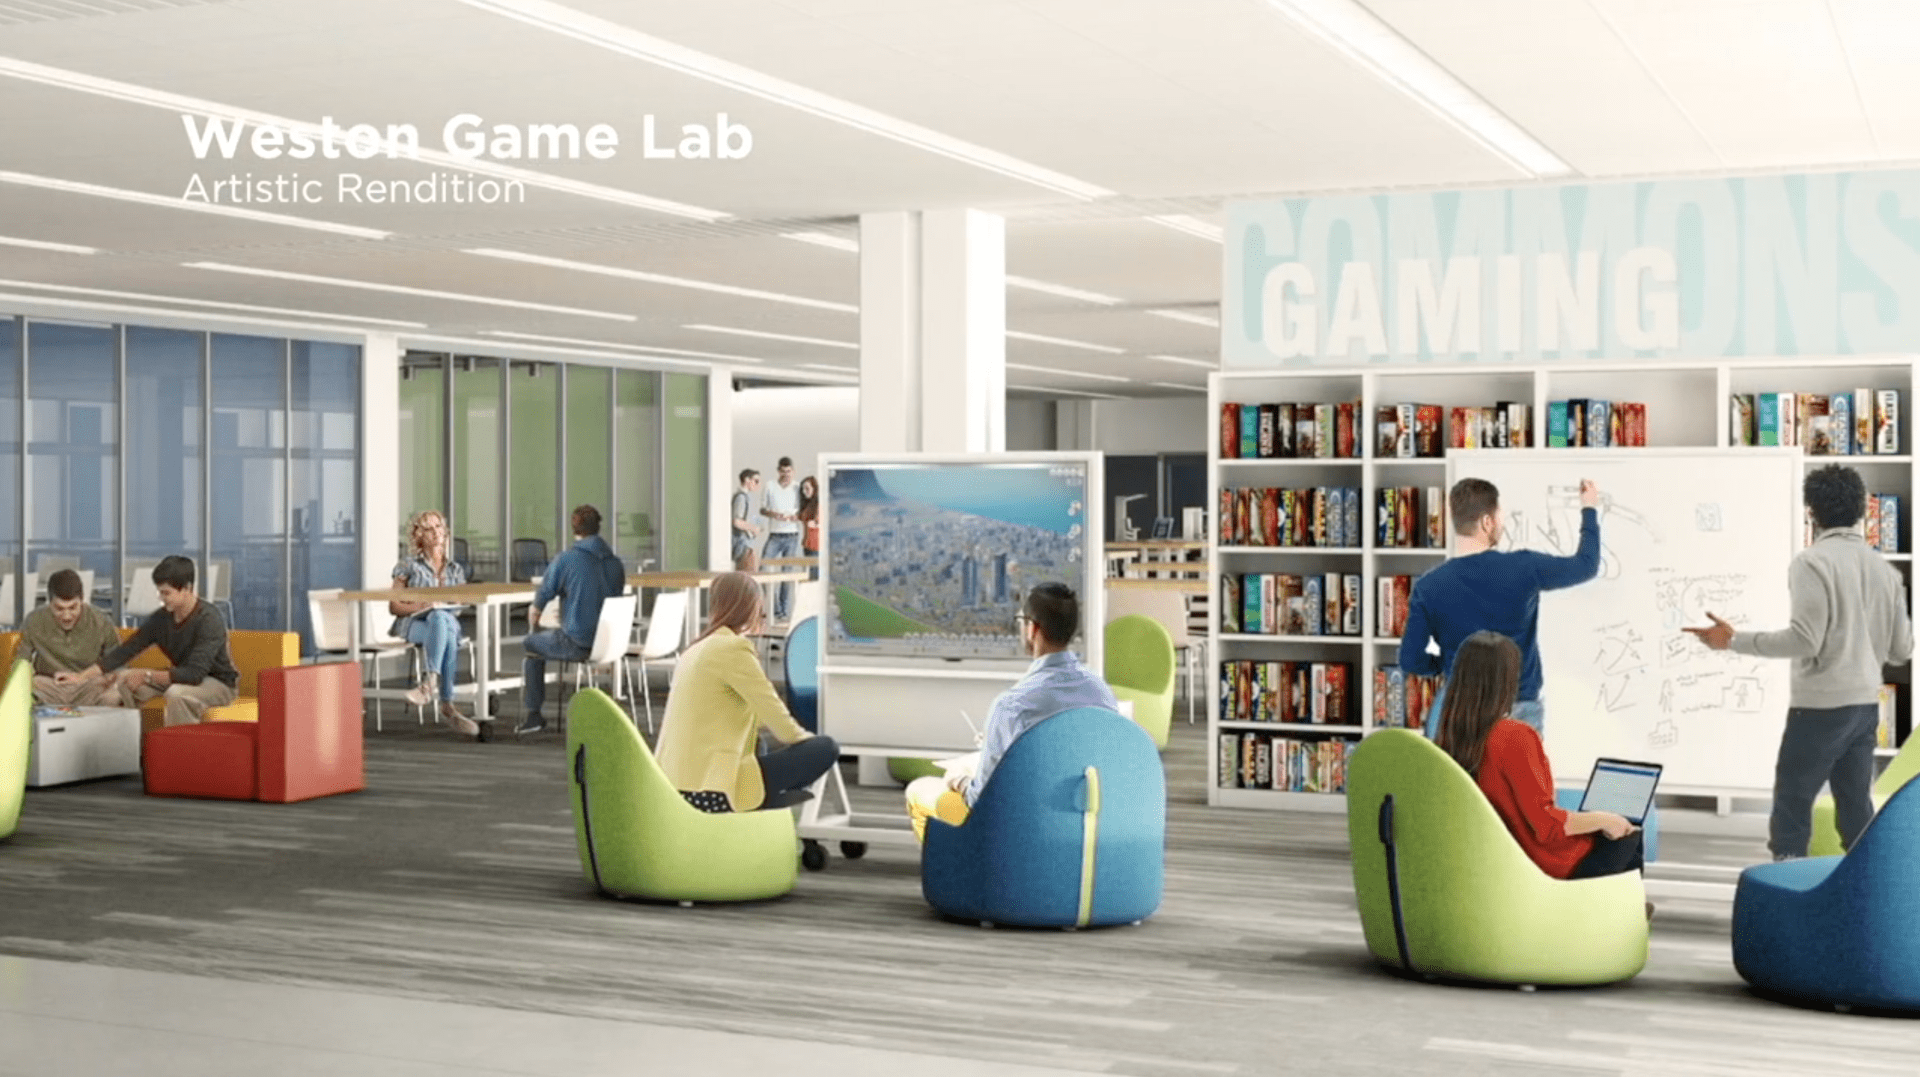 Artist rendering of students gaming open area of Westin game lab